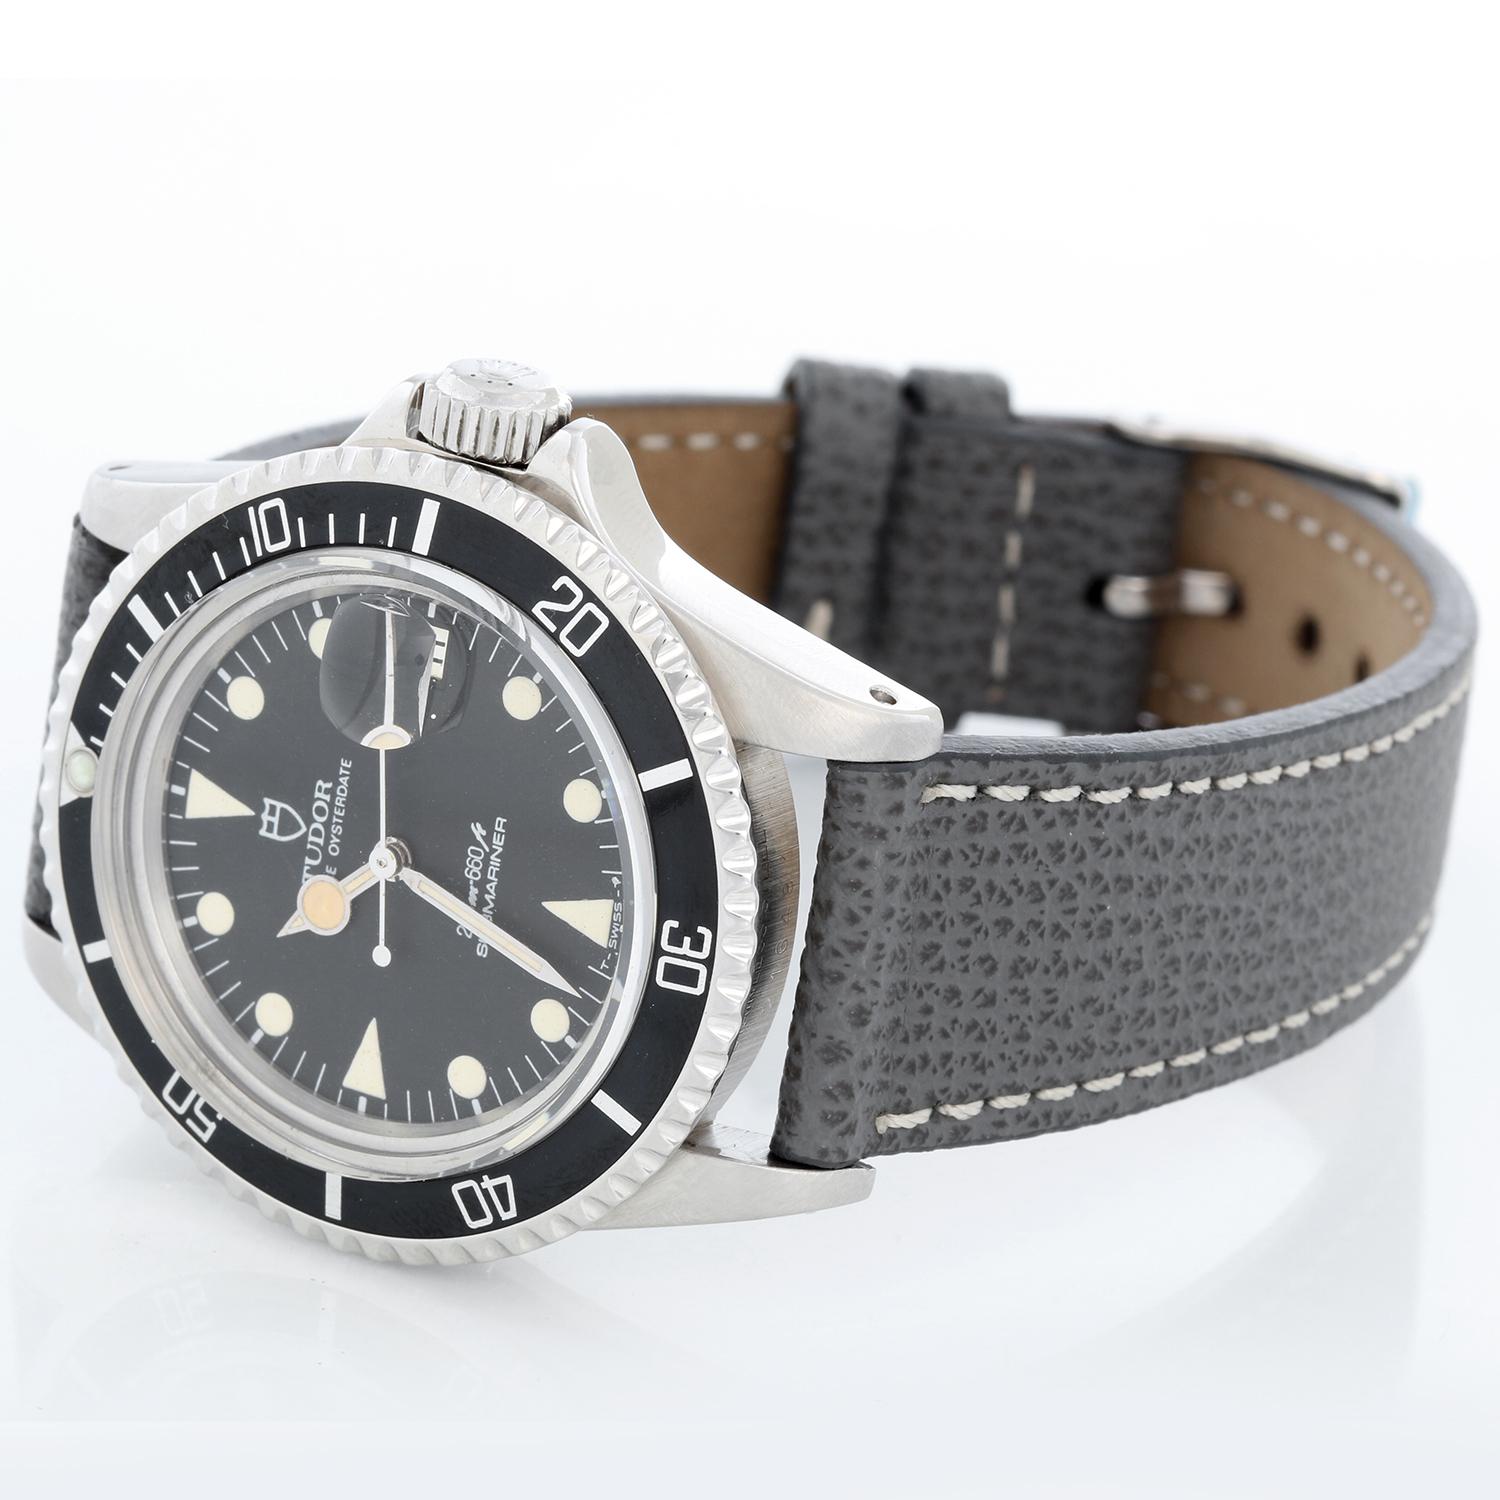 Vintage Tudor Submariner Ref. 76100 Men's Watch - Automatic winding. Stainless steel ( 40 mm ) with time lapse rotating bezel. Black dial with luminous hour markers. Leather strap with tang buckle. Pre-owned with custom box.
